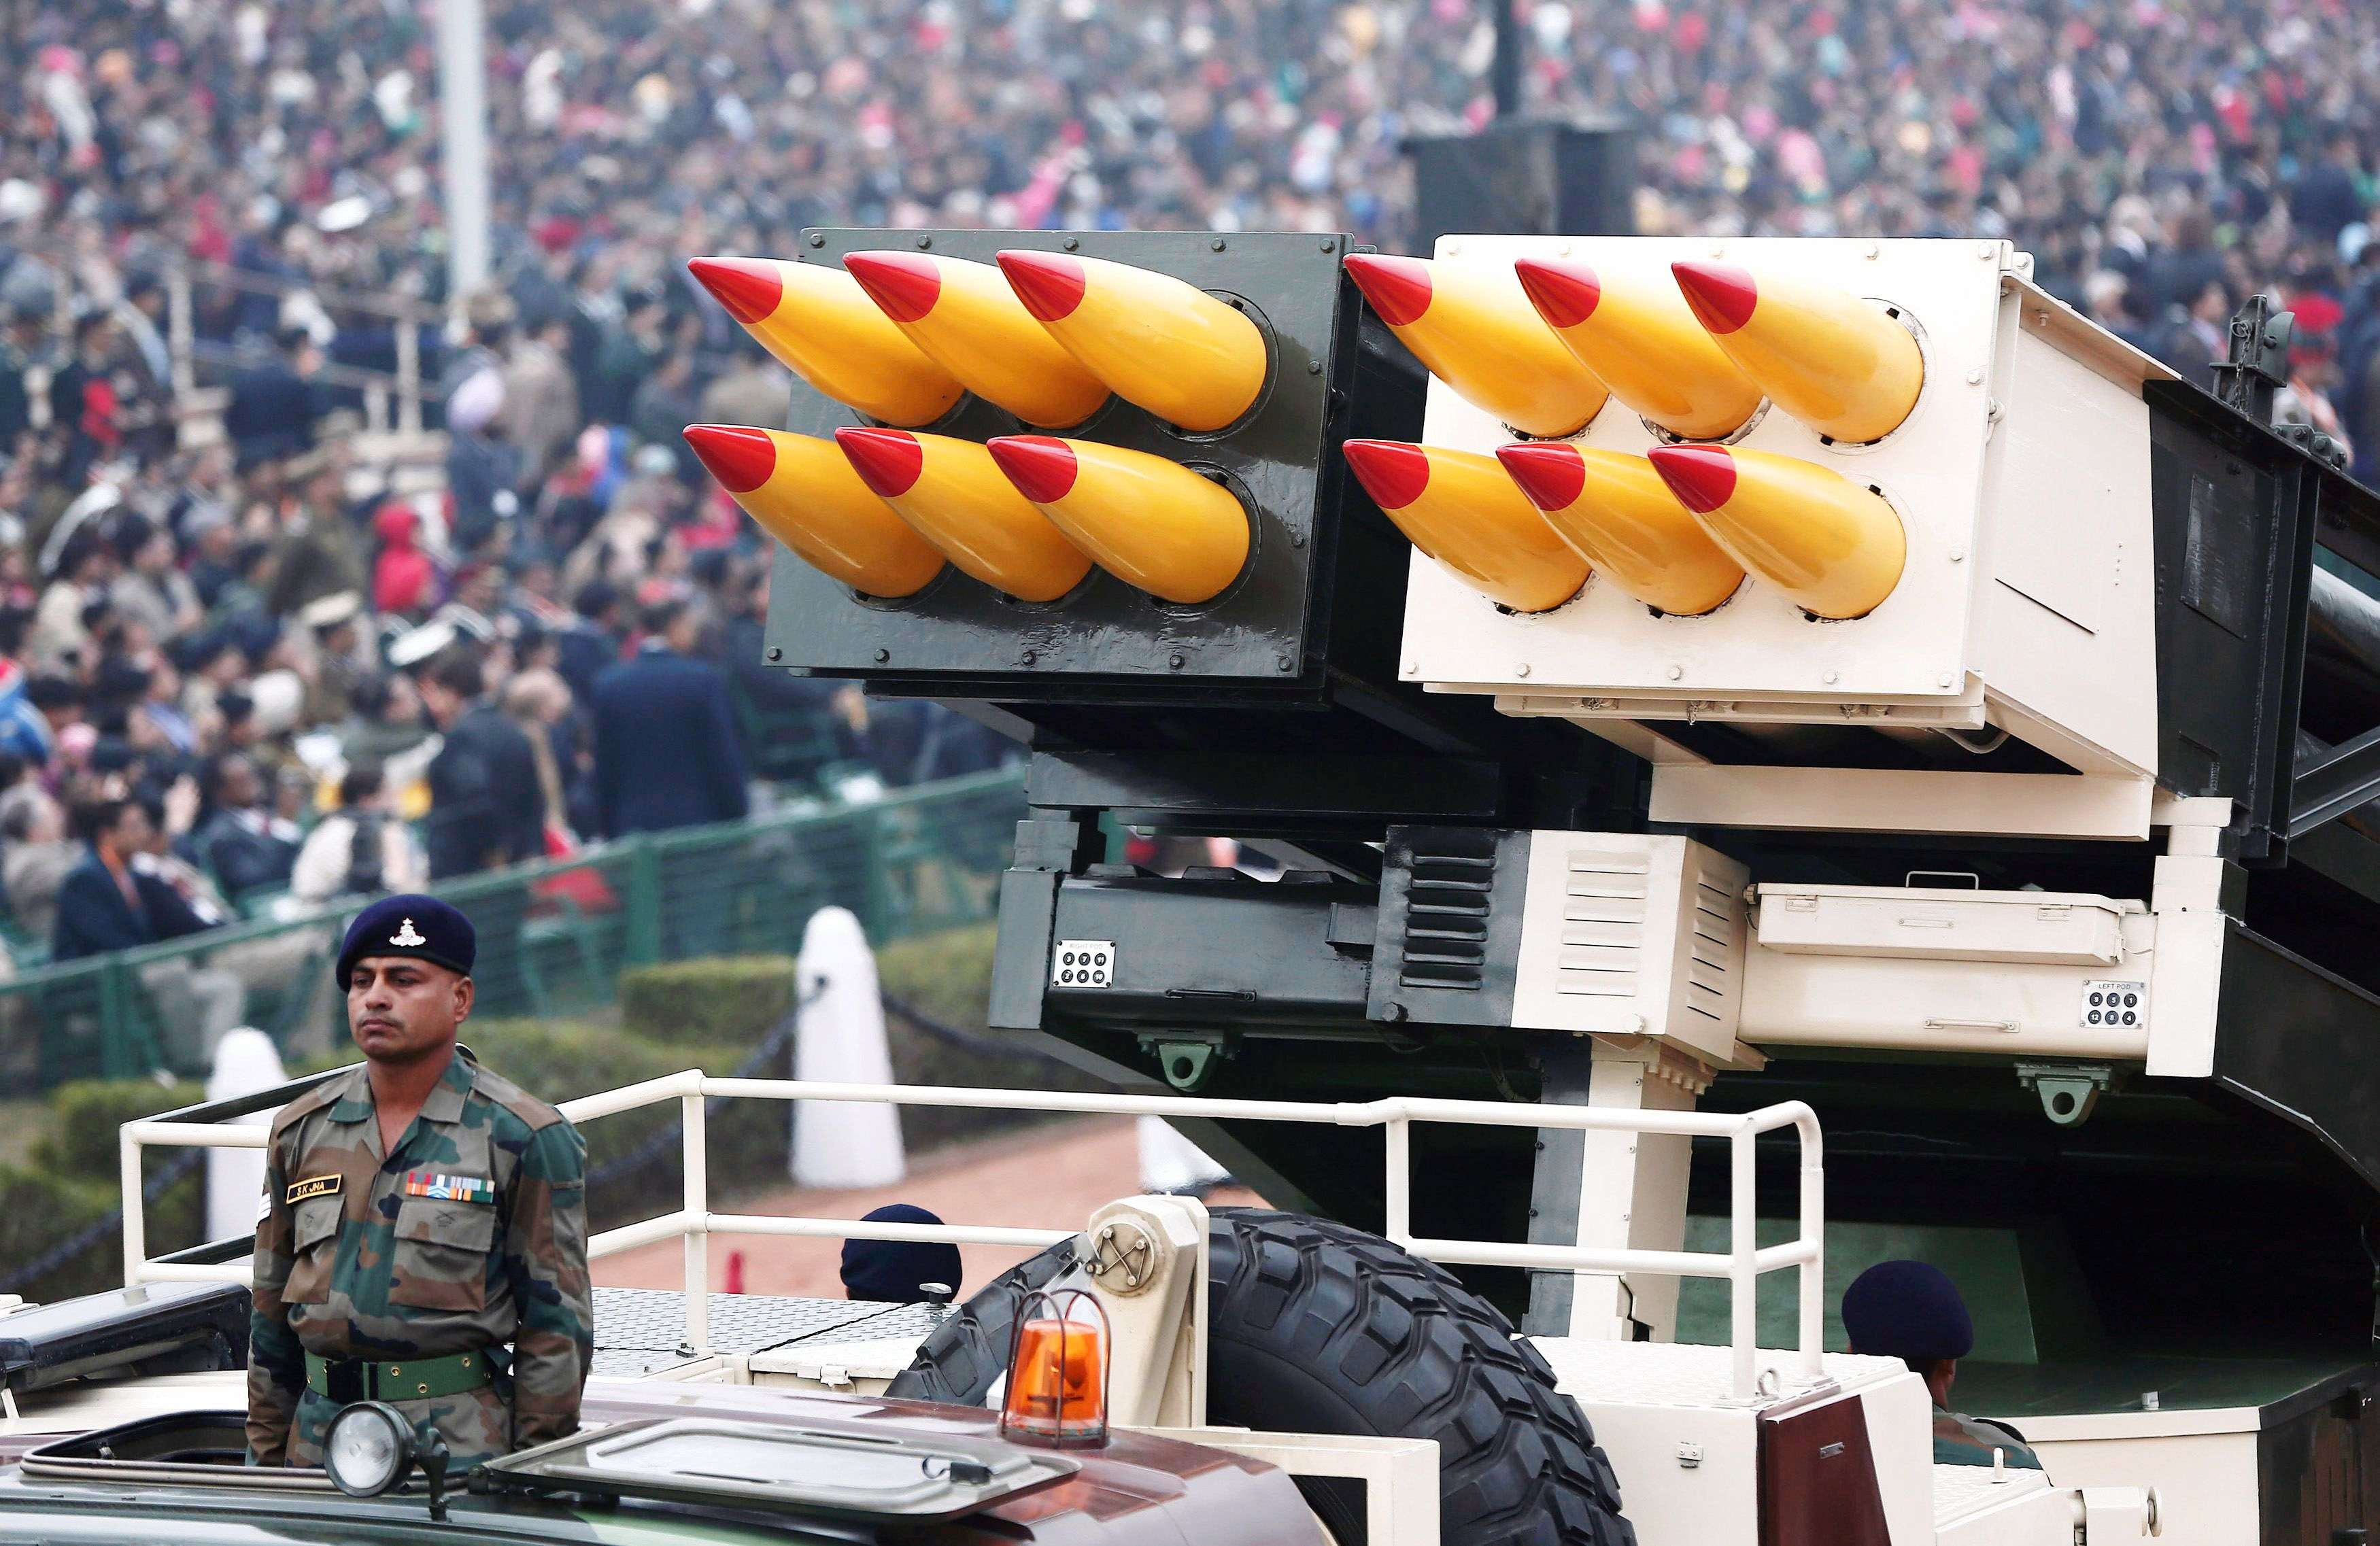 Indian Army's Pinaka multi barrel rocket launcher systems are displayed during a full dress rehearsal for the Republic Day parade in New Delhi. (REUTERS/Adnan Abidi)